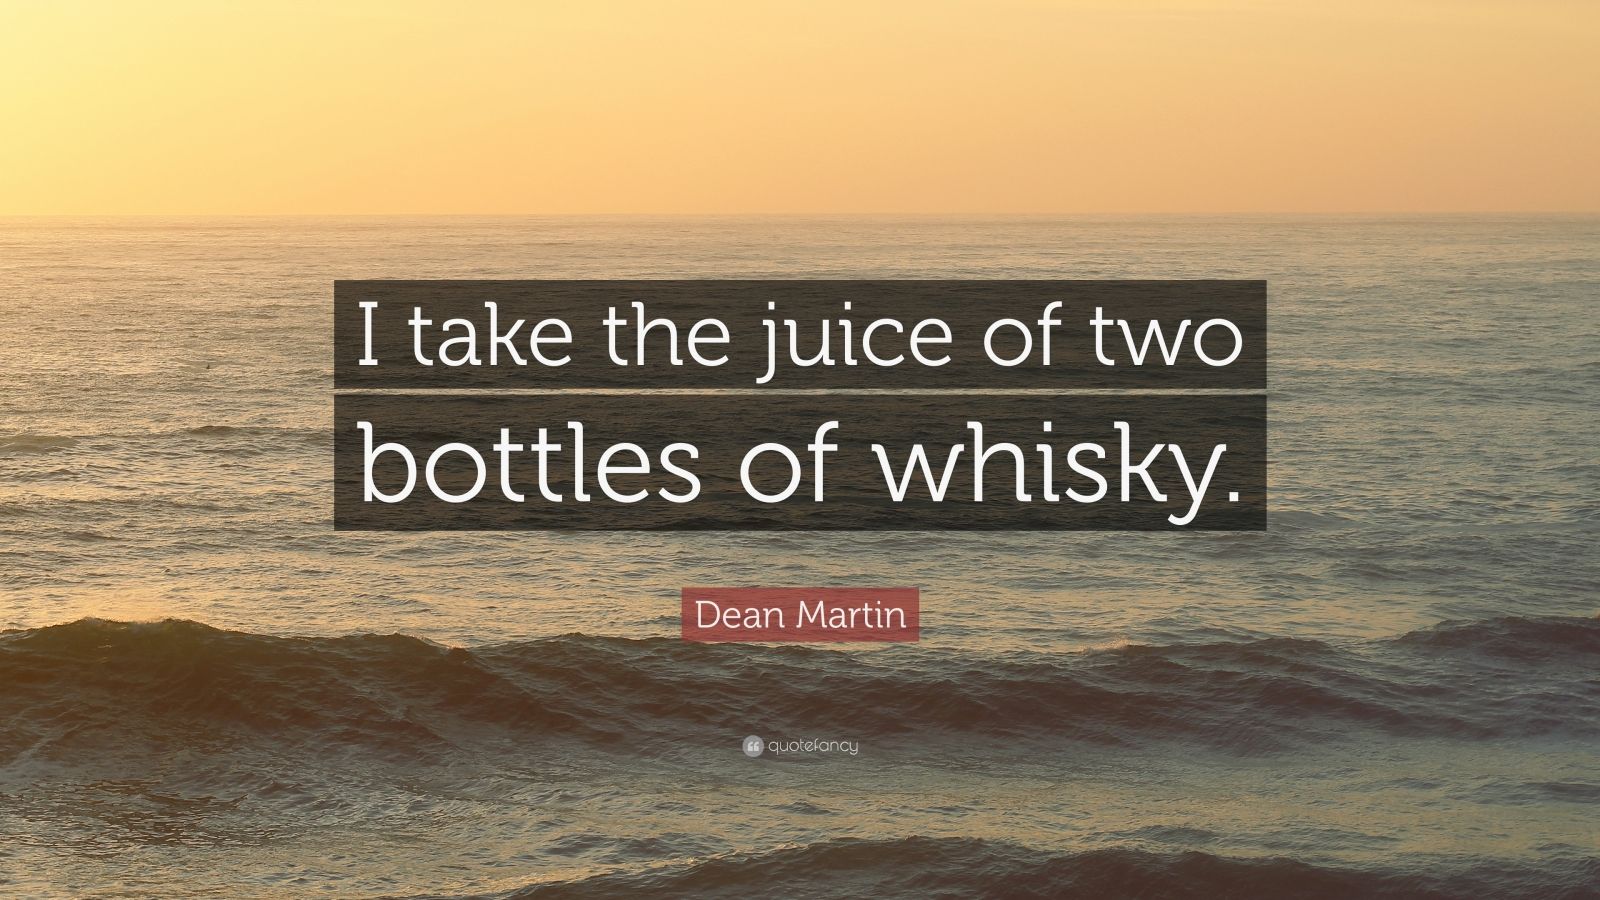 Dean Martin Quote: “I take the juice of two bottles of whisky.”